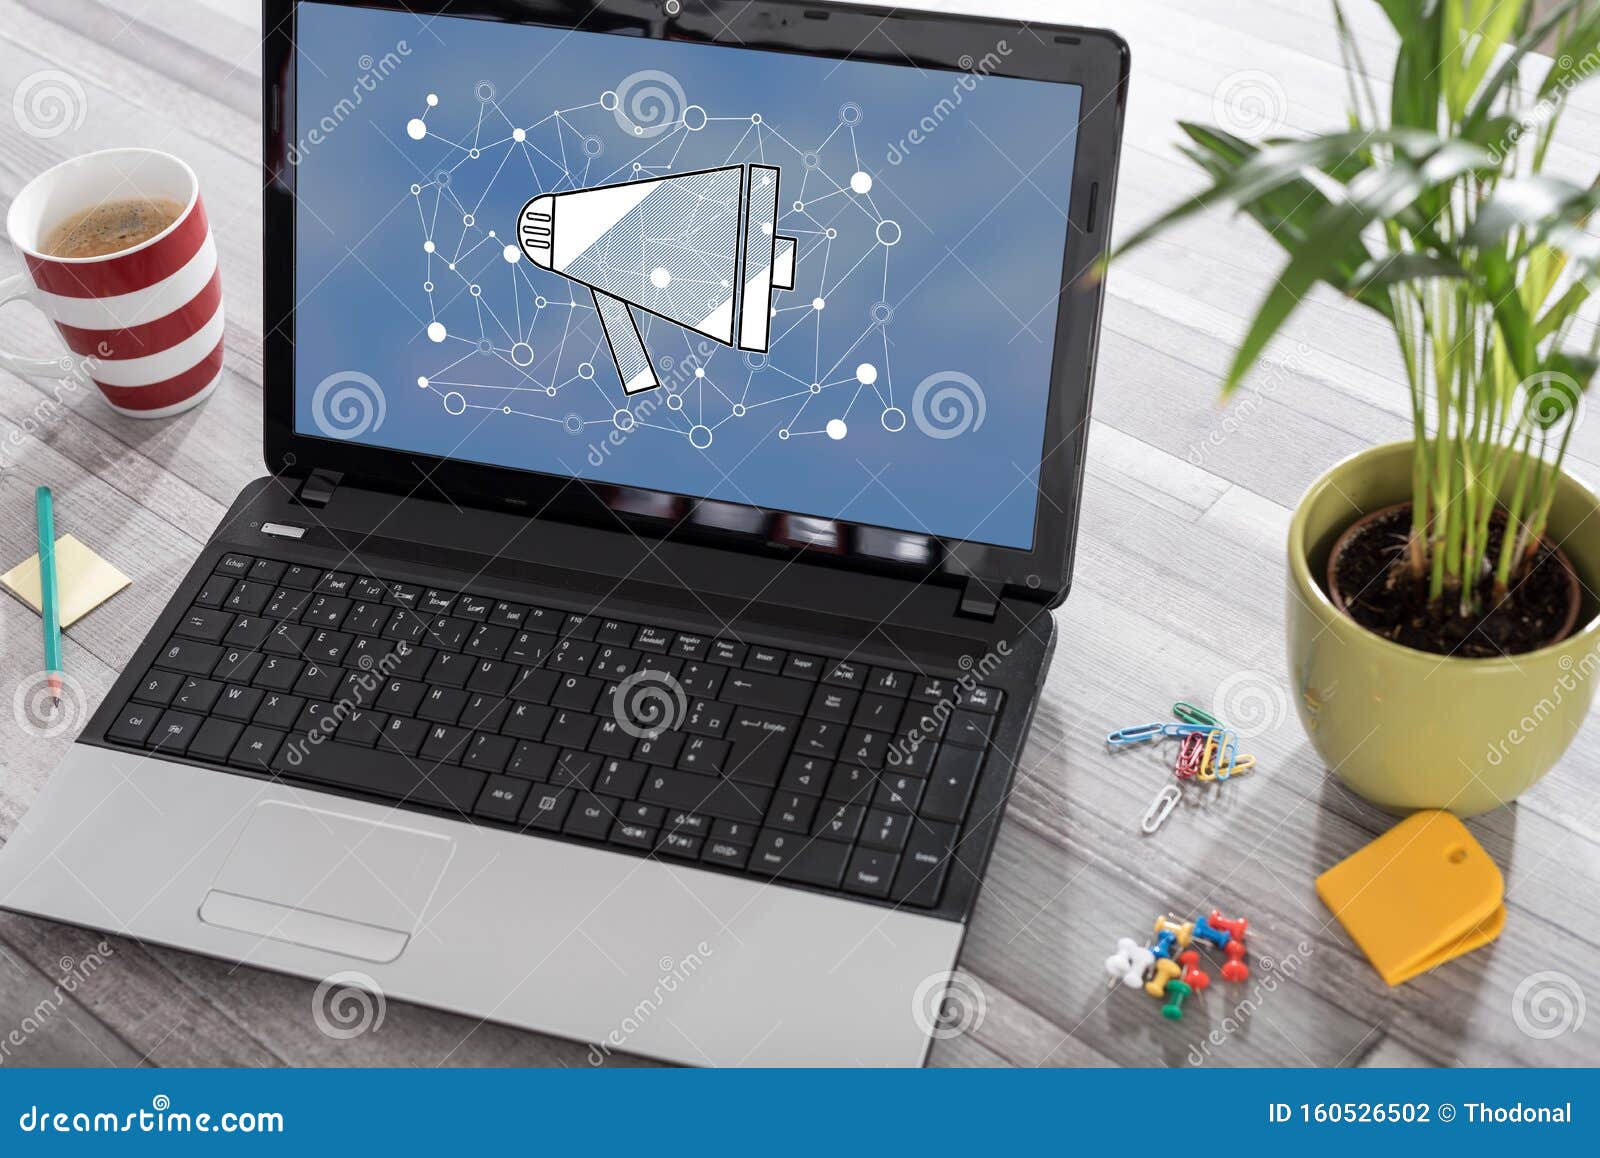 Digital Marketing Concept on a Laptop Stock Photo - Image of technology